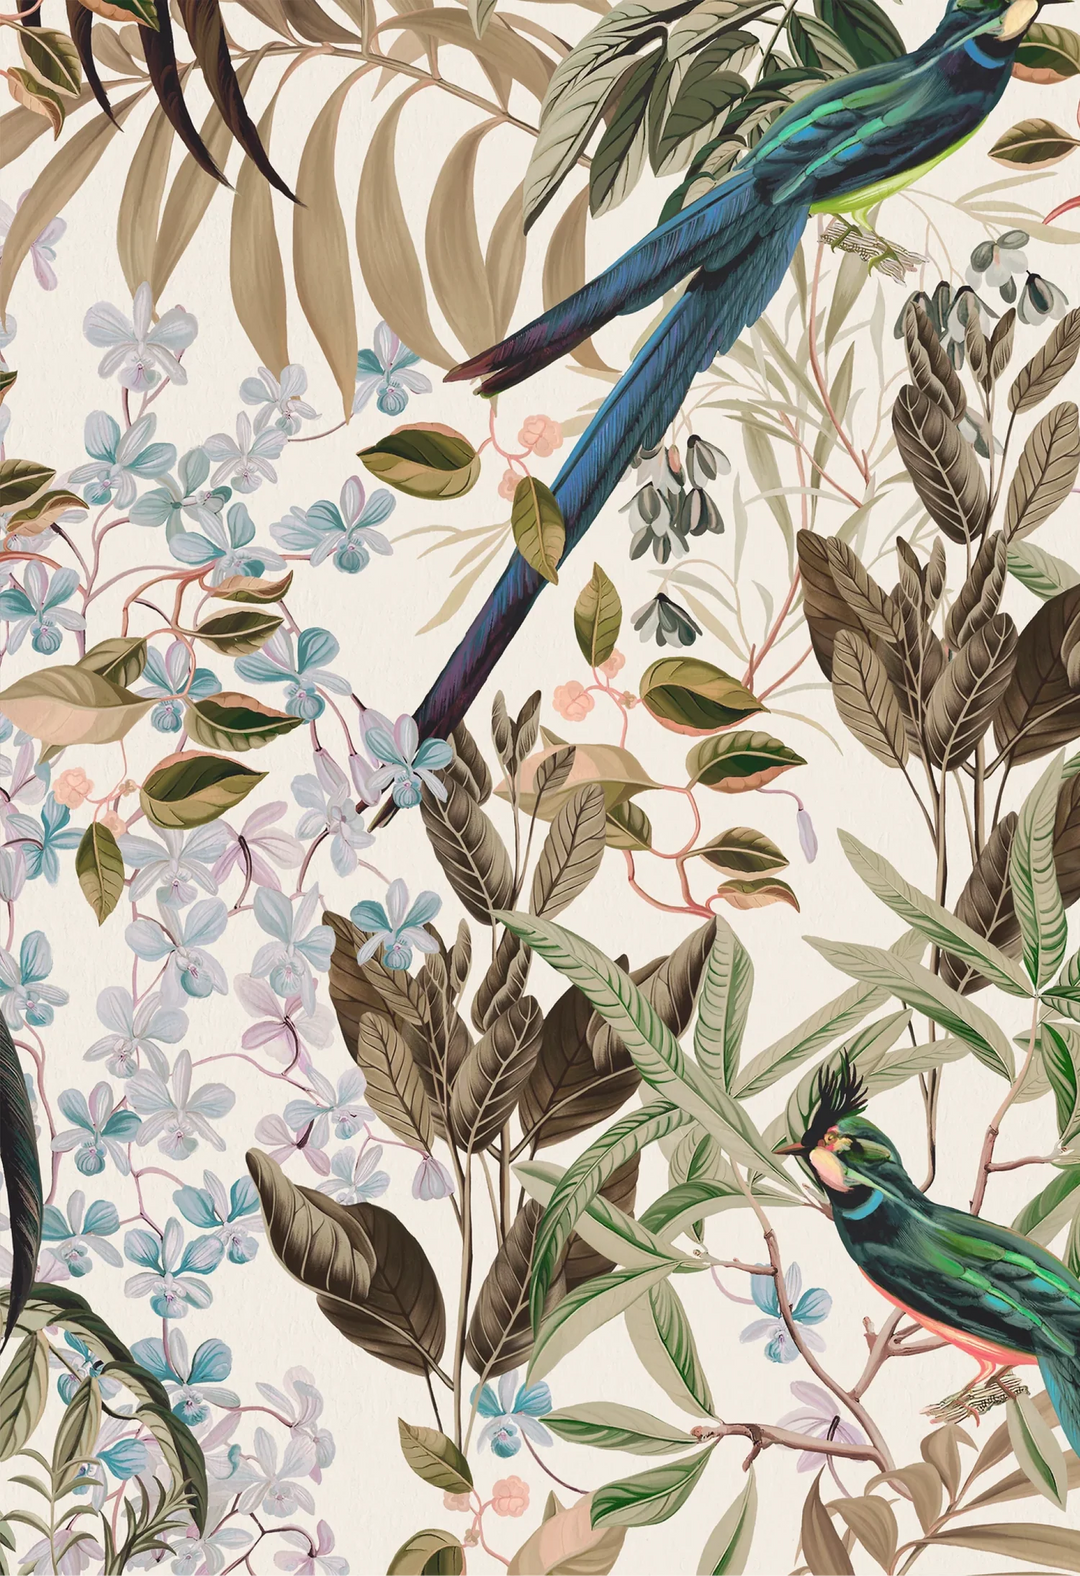 Deus-ex-gardenia-resplendant-woods-wallpaper-forest-beautiful-tropical-birds0rich-tones-feathers-botanical-woodland-colours-hand-illustrated-print-shaded-white-cream-background-colour